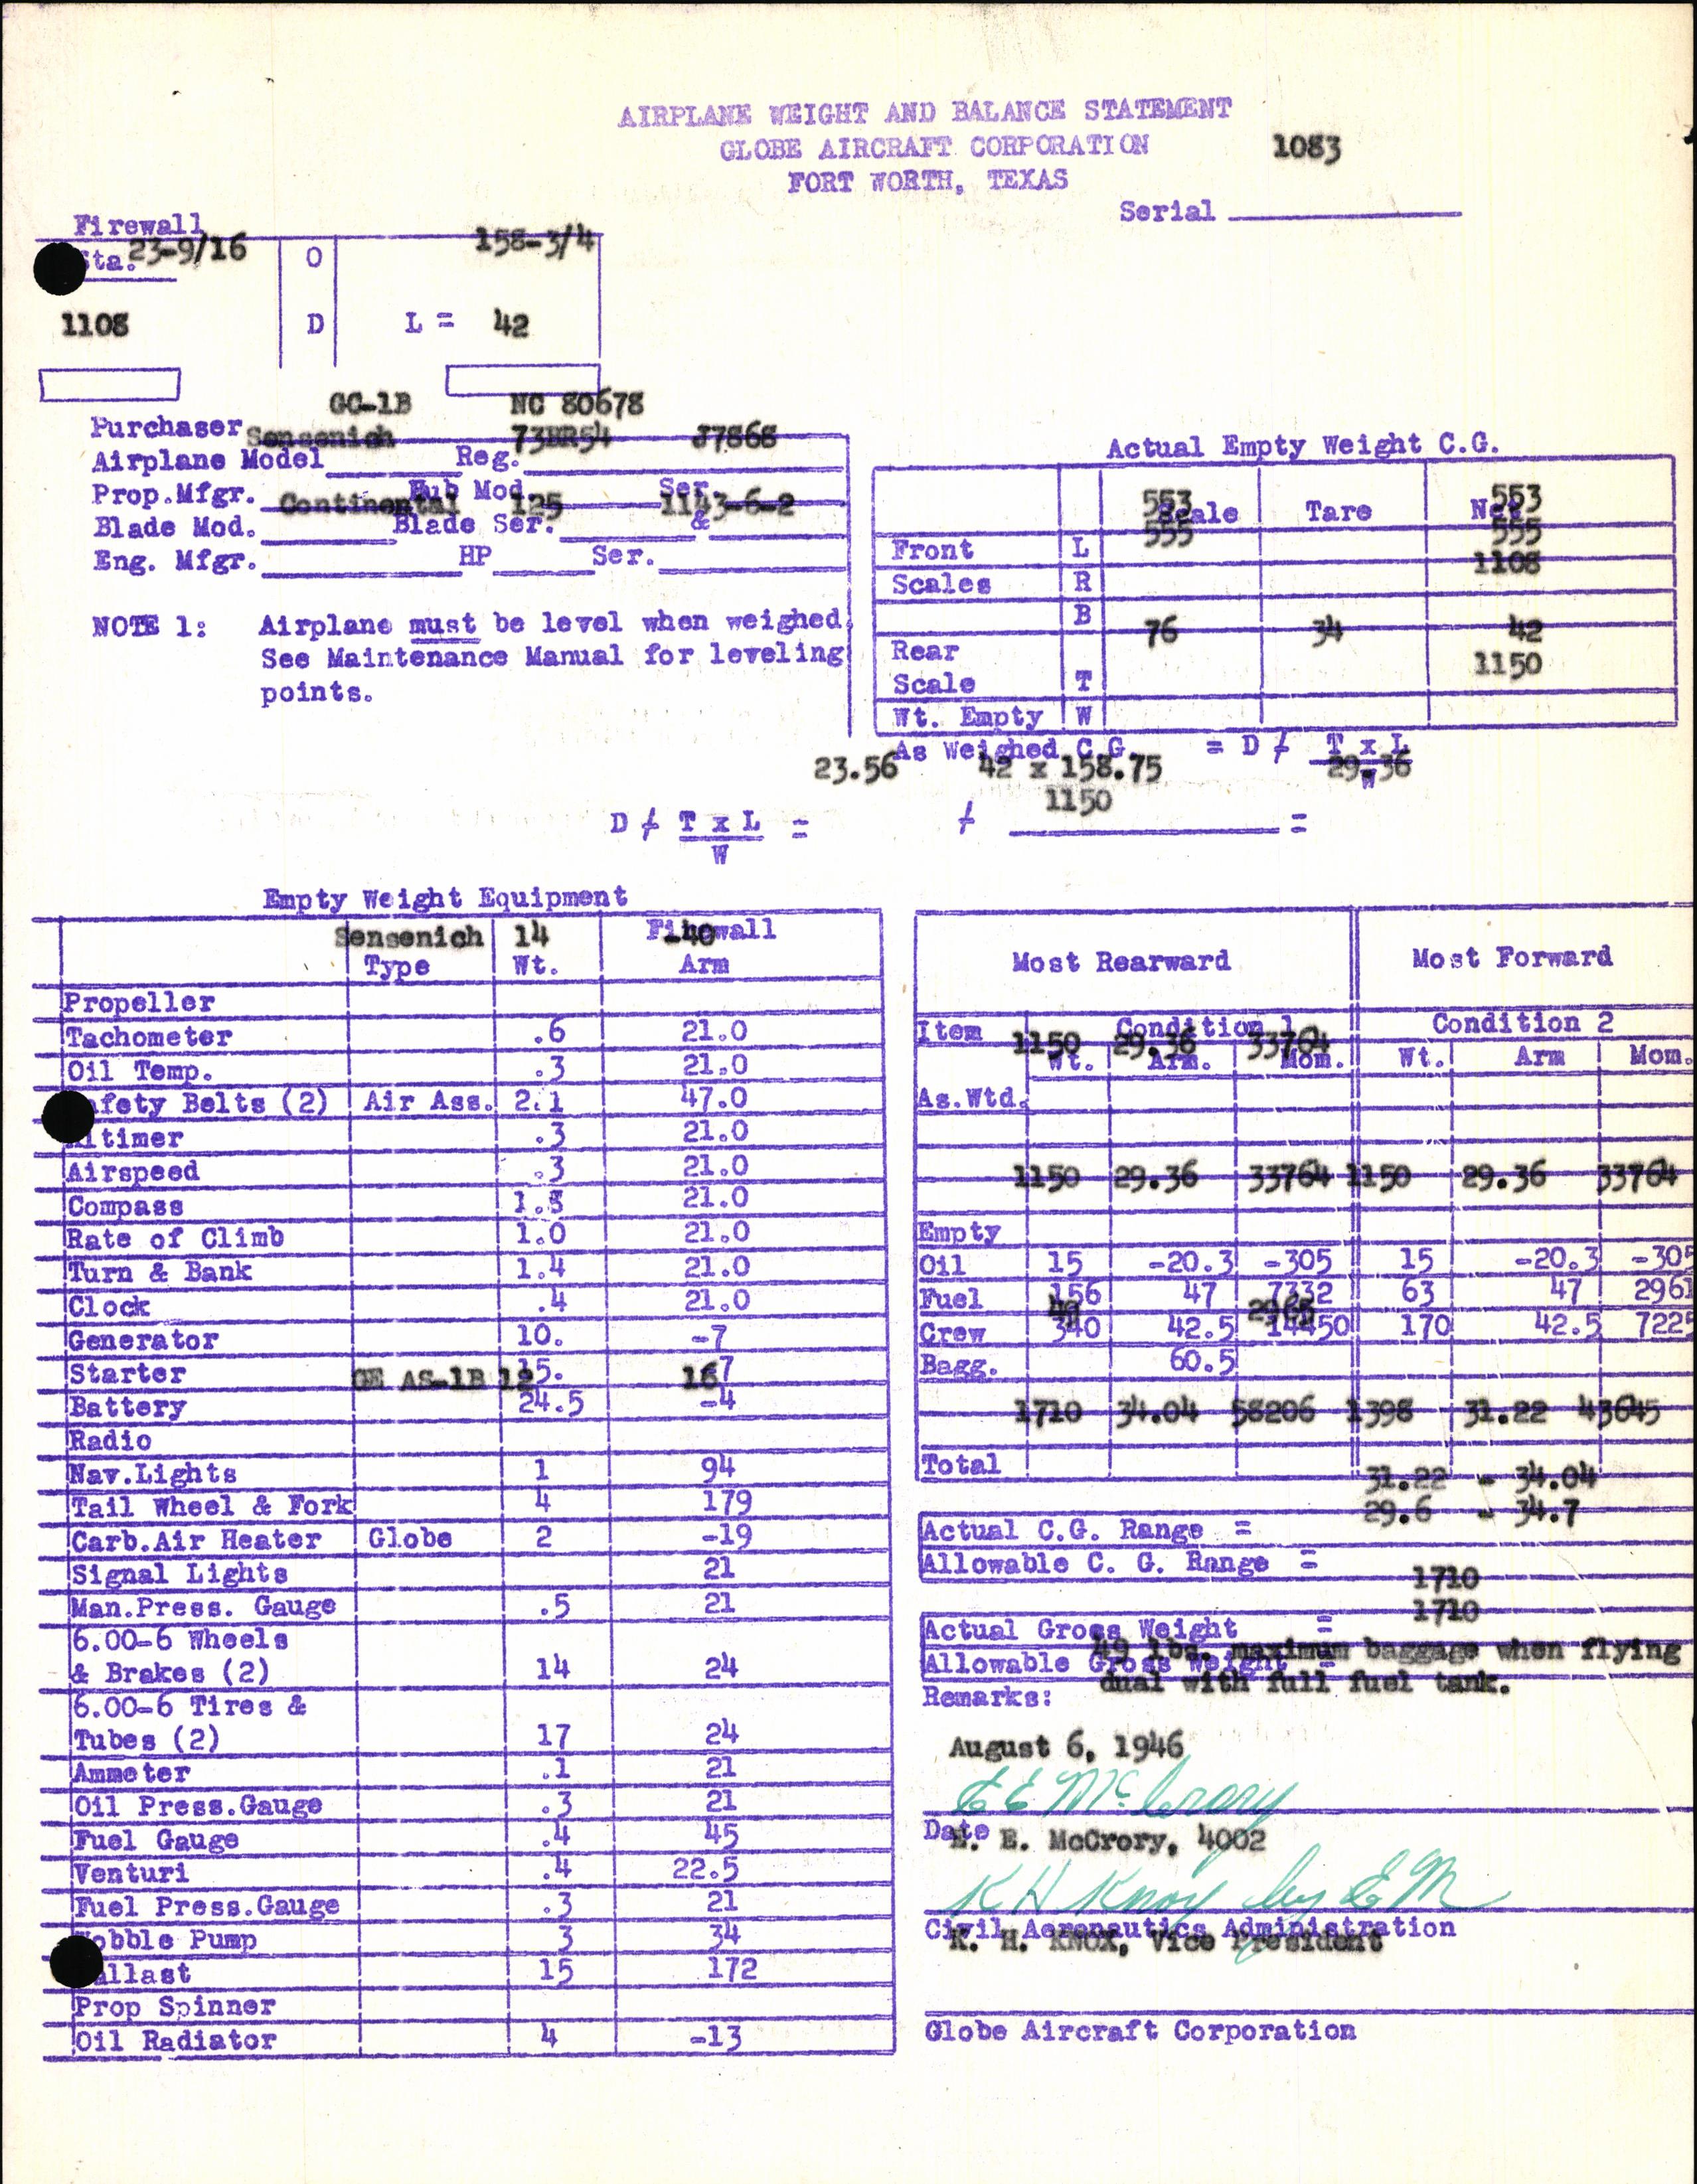 Sample page 5 from AirCorps Library document: Technical Information for Serial Number 1083